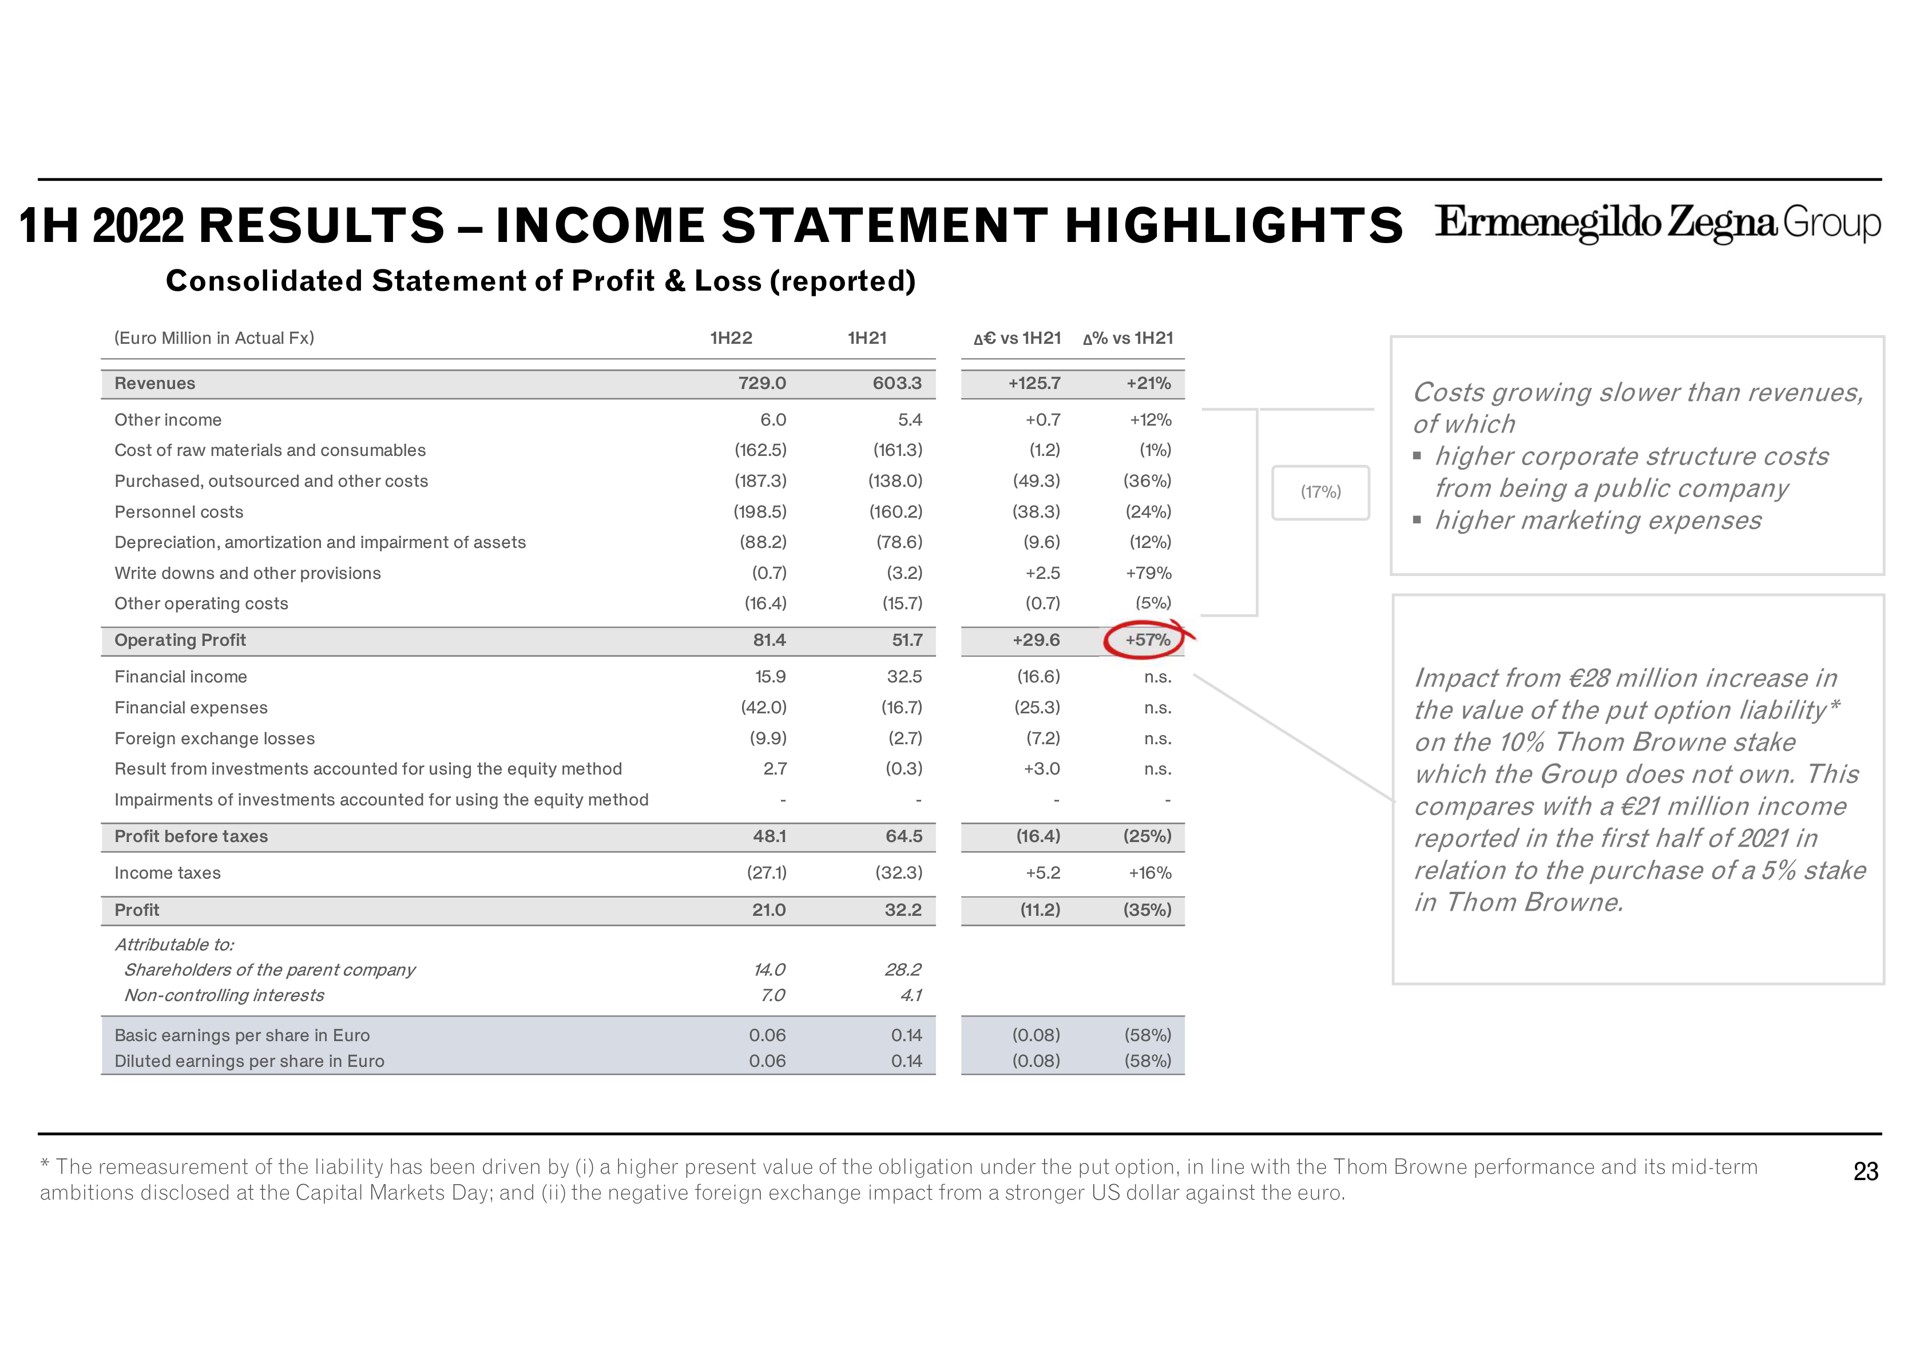 results income statement highlights group consolidated of profit loss reported million in actual a a seer revenues other cost of raw materials and purchased and other costs personnel costs depreciation amortization and impairment of assets write downs and other provisions other operating costs operating profit financial financial expenses foreign exchange losses result from investments accounted for using the equity method impairments of investments accounted for using the equity method profit before taxes taxes profit attributable to shareholders of the parent company non controlling interests basic earnings per share in diluted earnings per share in gar costs growing than revenues of which higher corporate structure costs from being a public company higher marketing expenses from million increase in the value of the put option liability on the stake which the group does not own this compares with a million reported in the first half of in relation to the purchase of a stake in the remeasurement of the liability has been driven by i a higher present value of the obligation under the put option in line with the performance and its mid term ambitions disclosed at the capital markets day and the negative foreign exchange impact from a us dollar against the | Zegna